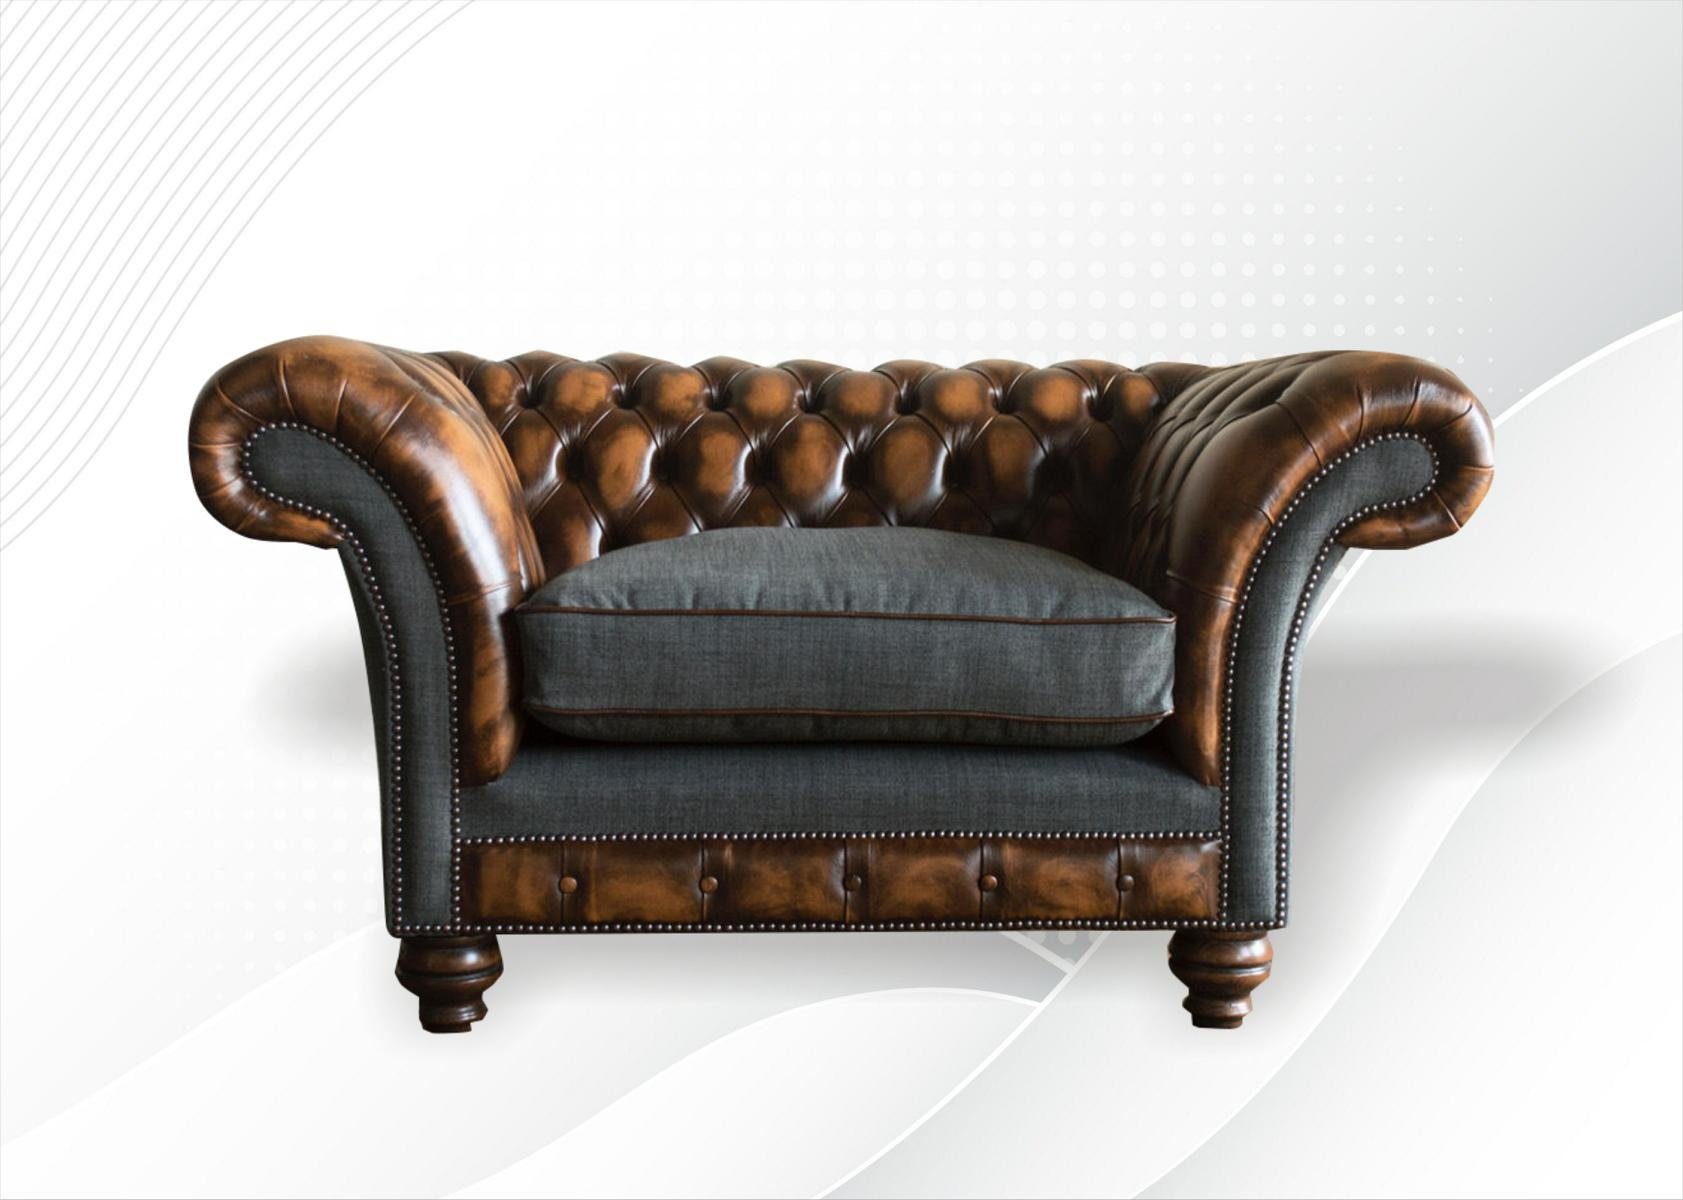 JVmoebel Chesterfield-Sessel, Sessel Couch Polster Sofa Textil Chesterfield Couchen 1 Sitzer | Chesterfield-Sessel